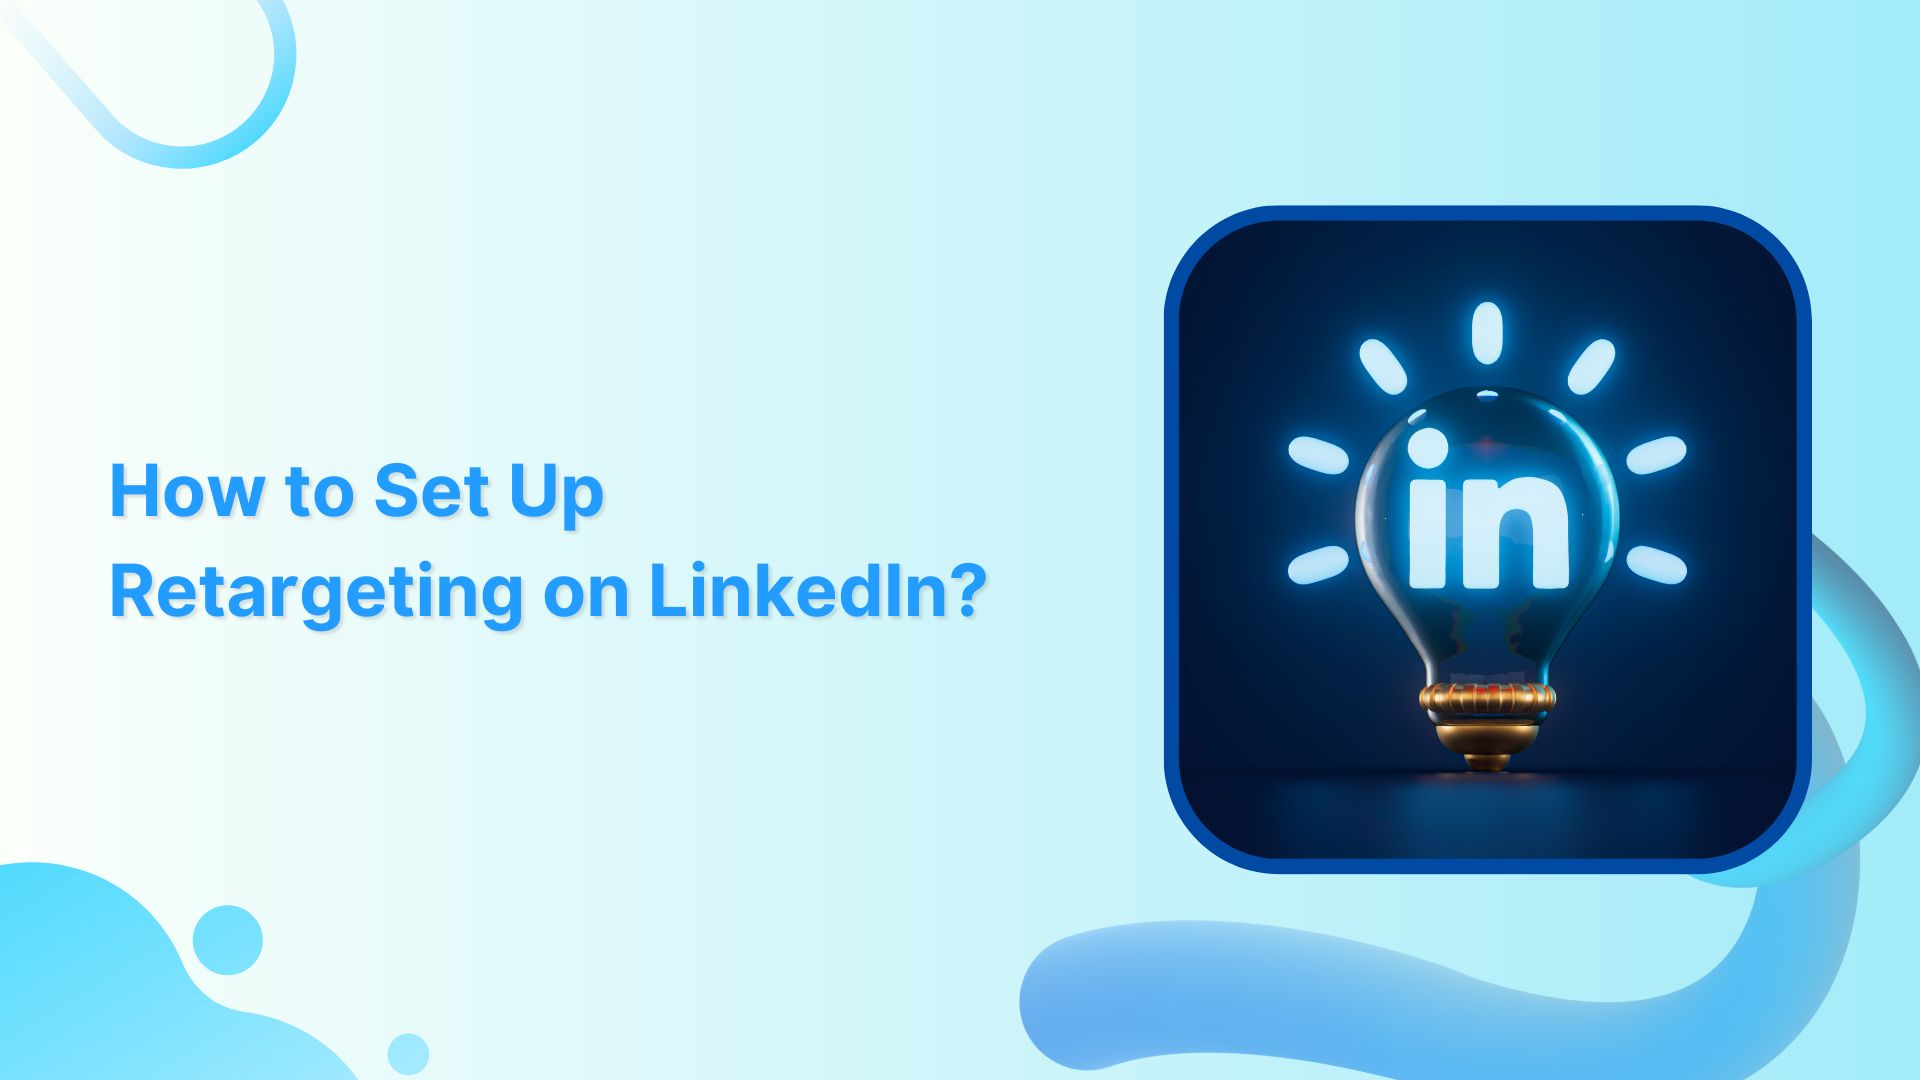 How to Set Up Retargeting on LinkedIn – Step-by-Step Guide